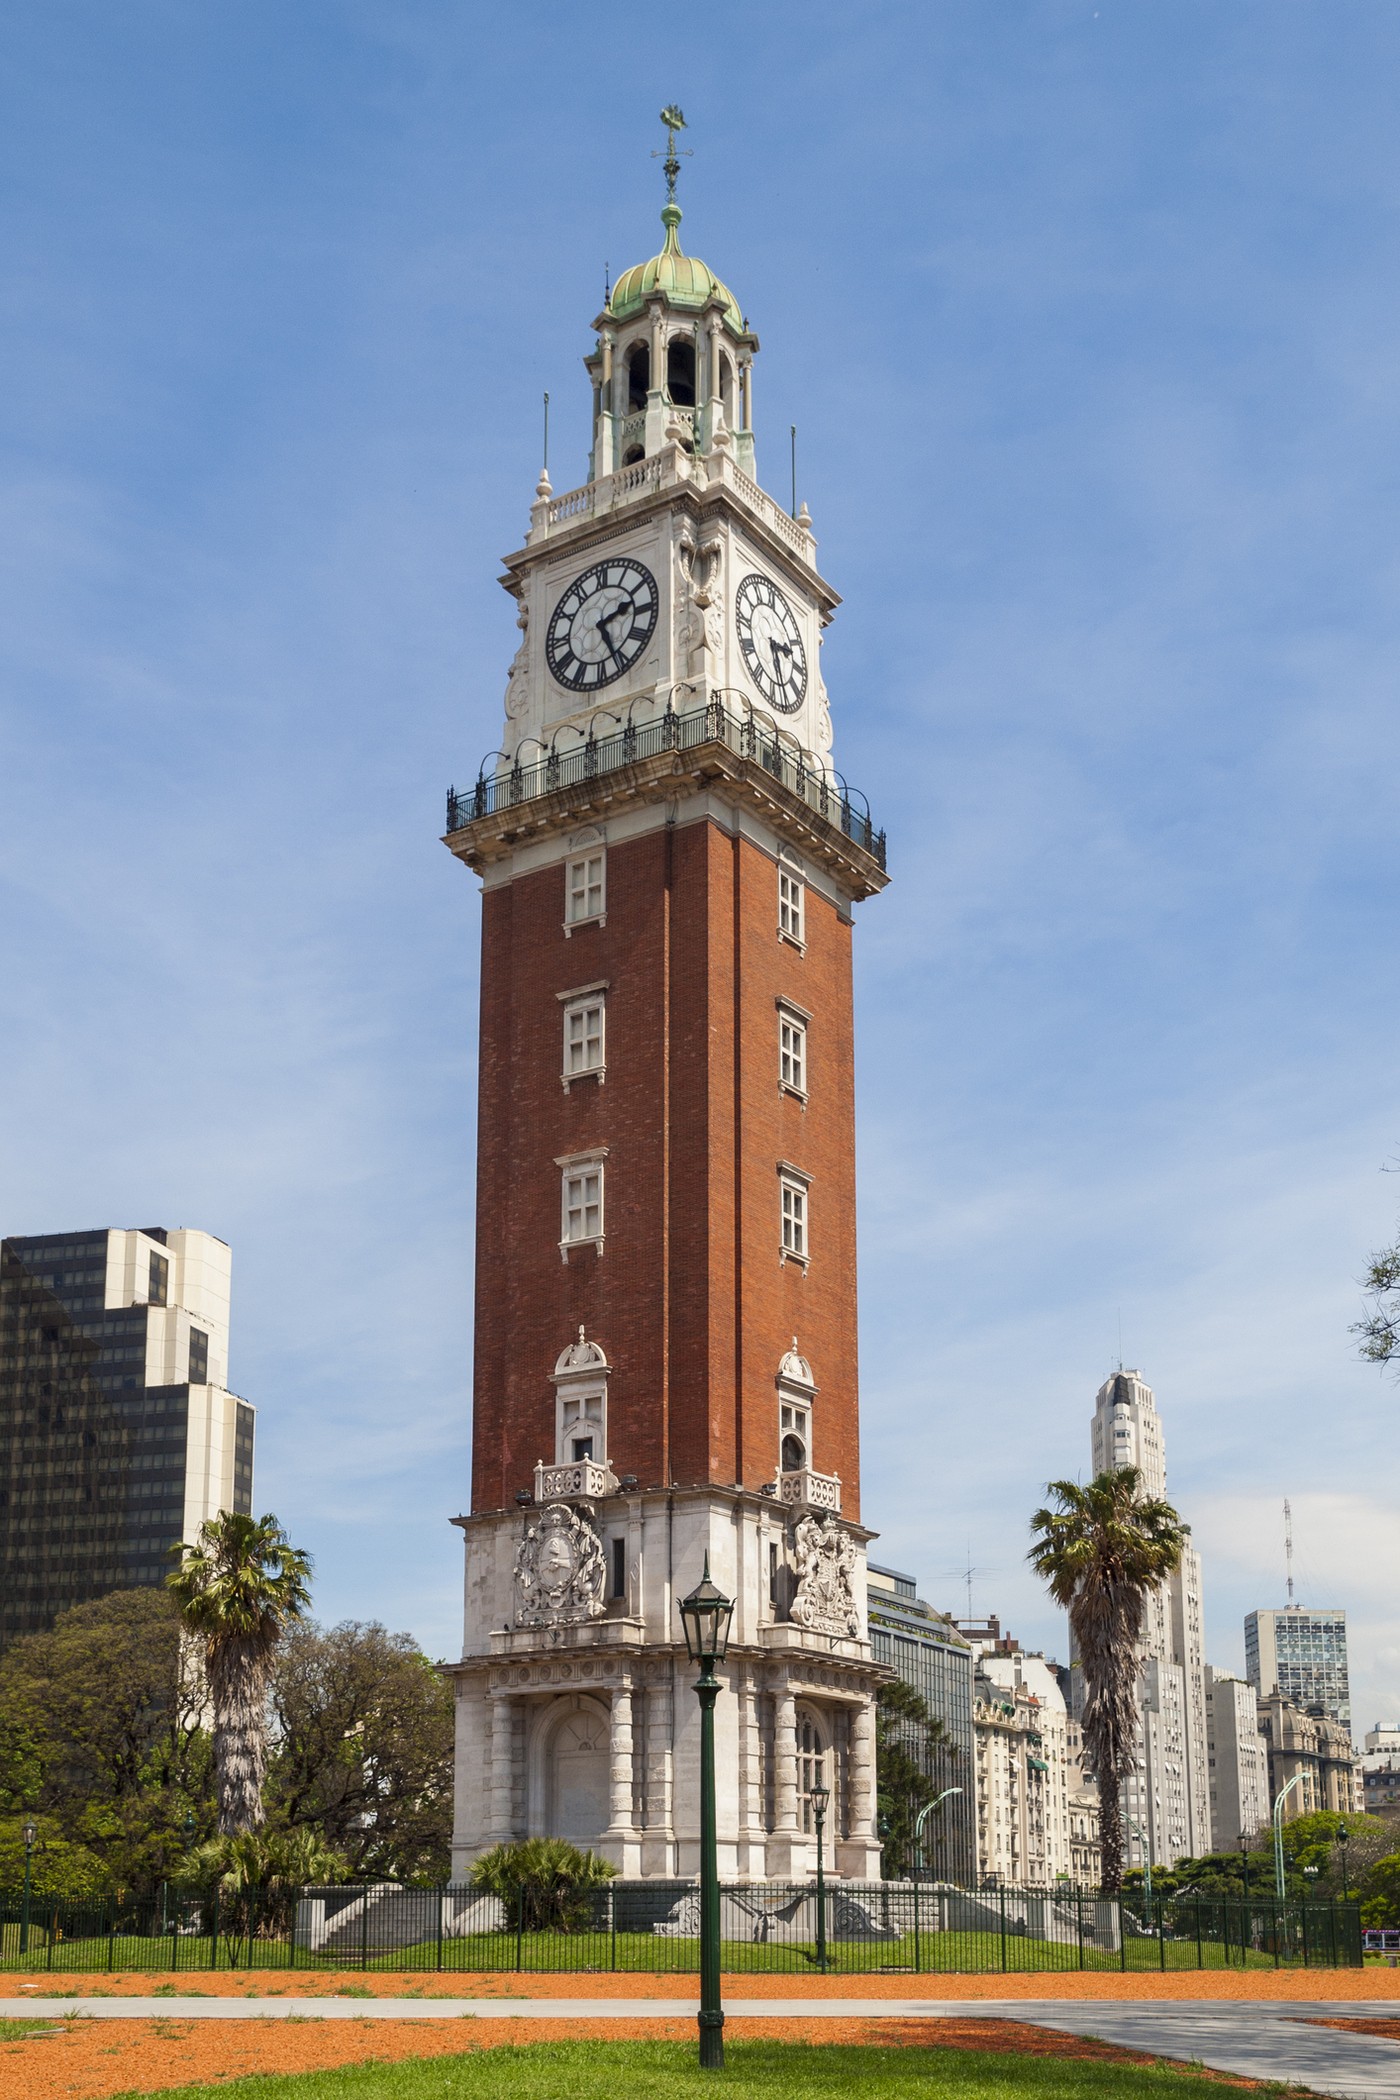 Torre Monumental, previously known as Torre de los Ingleses - a famous clock tower in Buenos Aires, Argentina (Foto: Getty Images/iStockphoto)